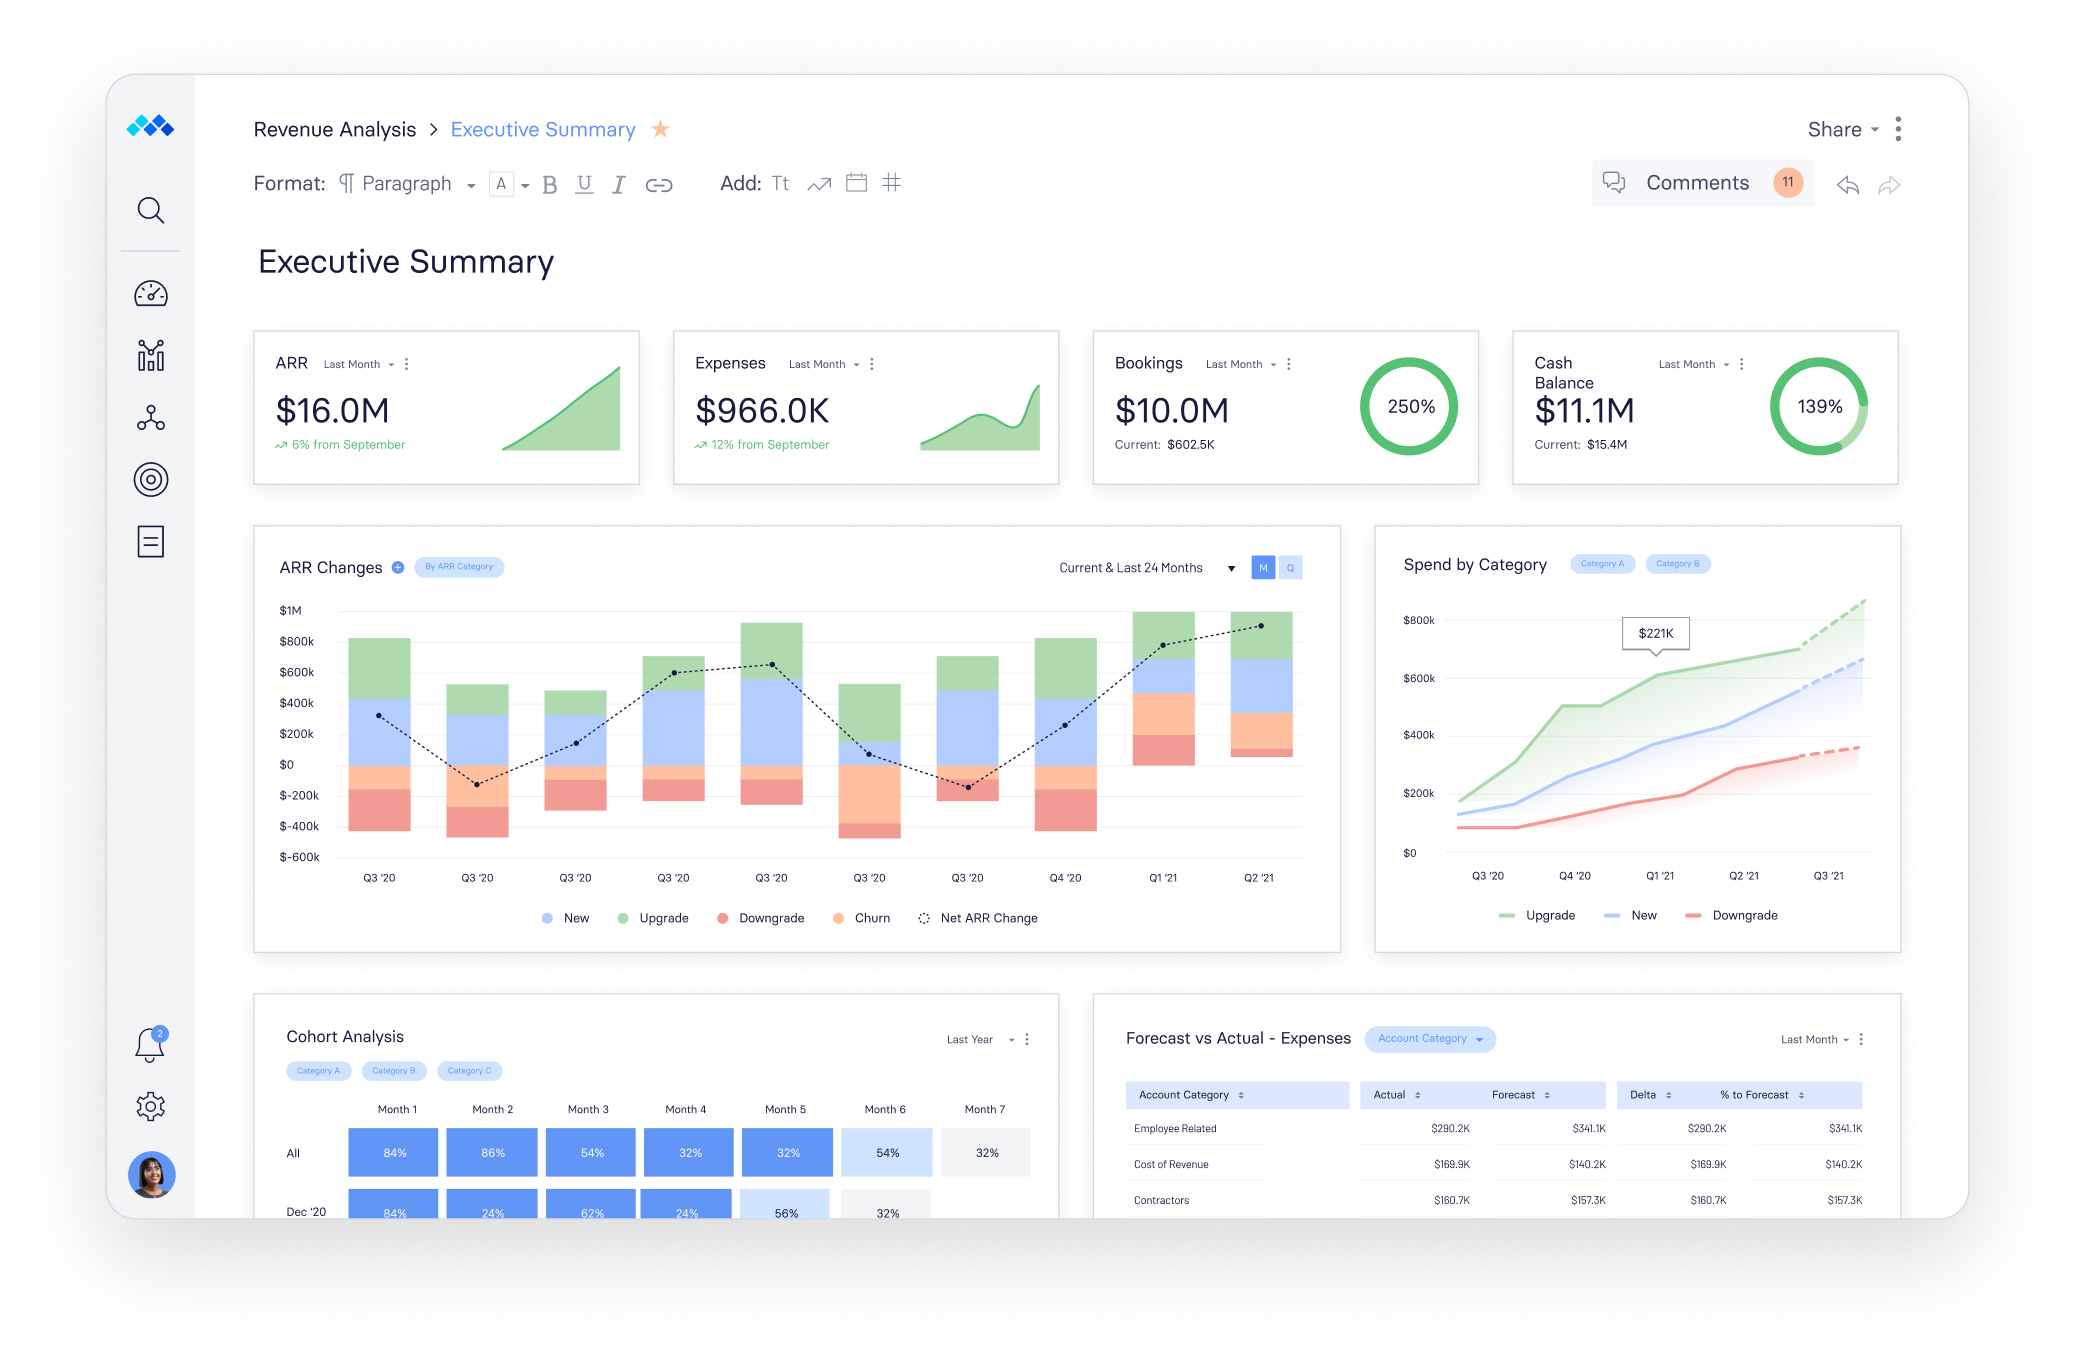 Financial Intelligence at Your Fingertips: Real-time analysis drives business performance and cross-functional collaboration with easy-to-use dashboards, data visualizations, and automated insights